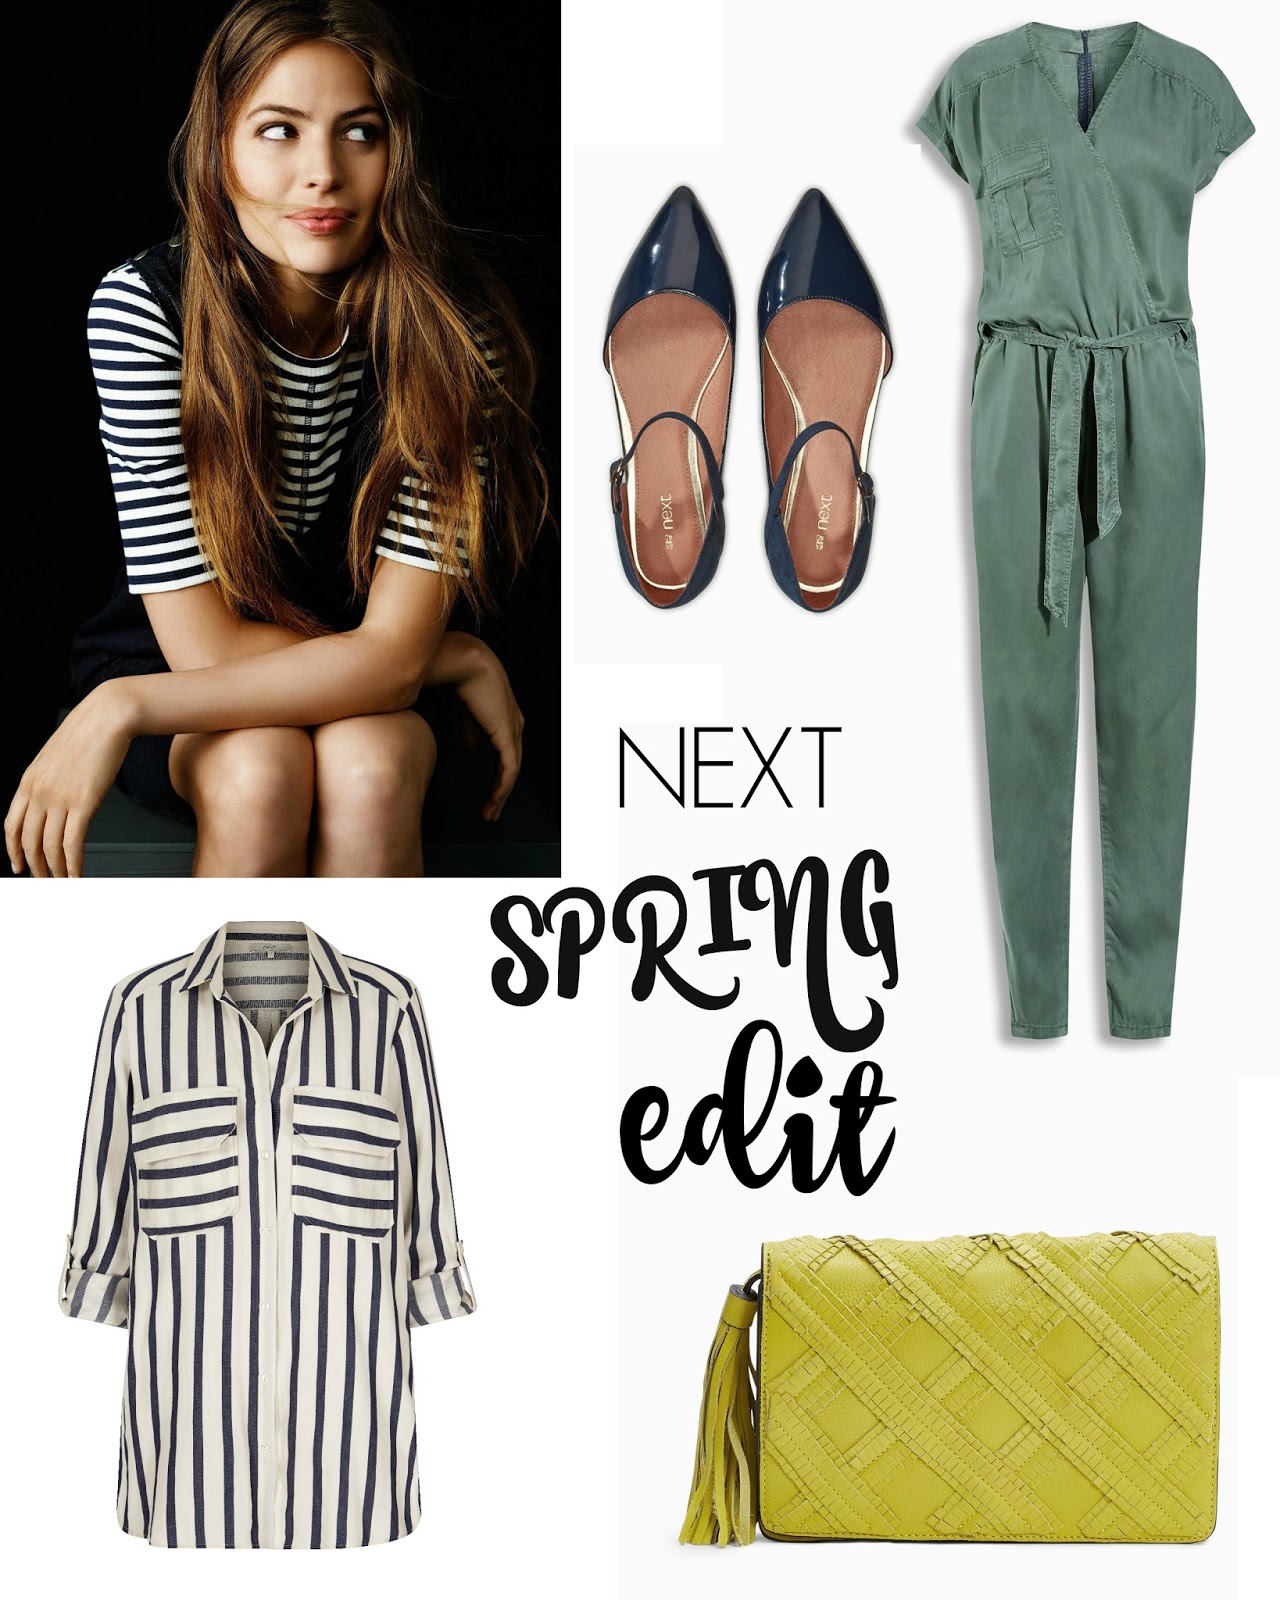 mamasVIB || V. I. BUYS: My Spring high street edit - the pieces you need to update your wardrobe FAST